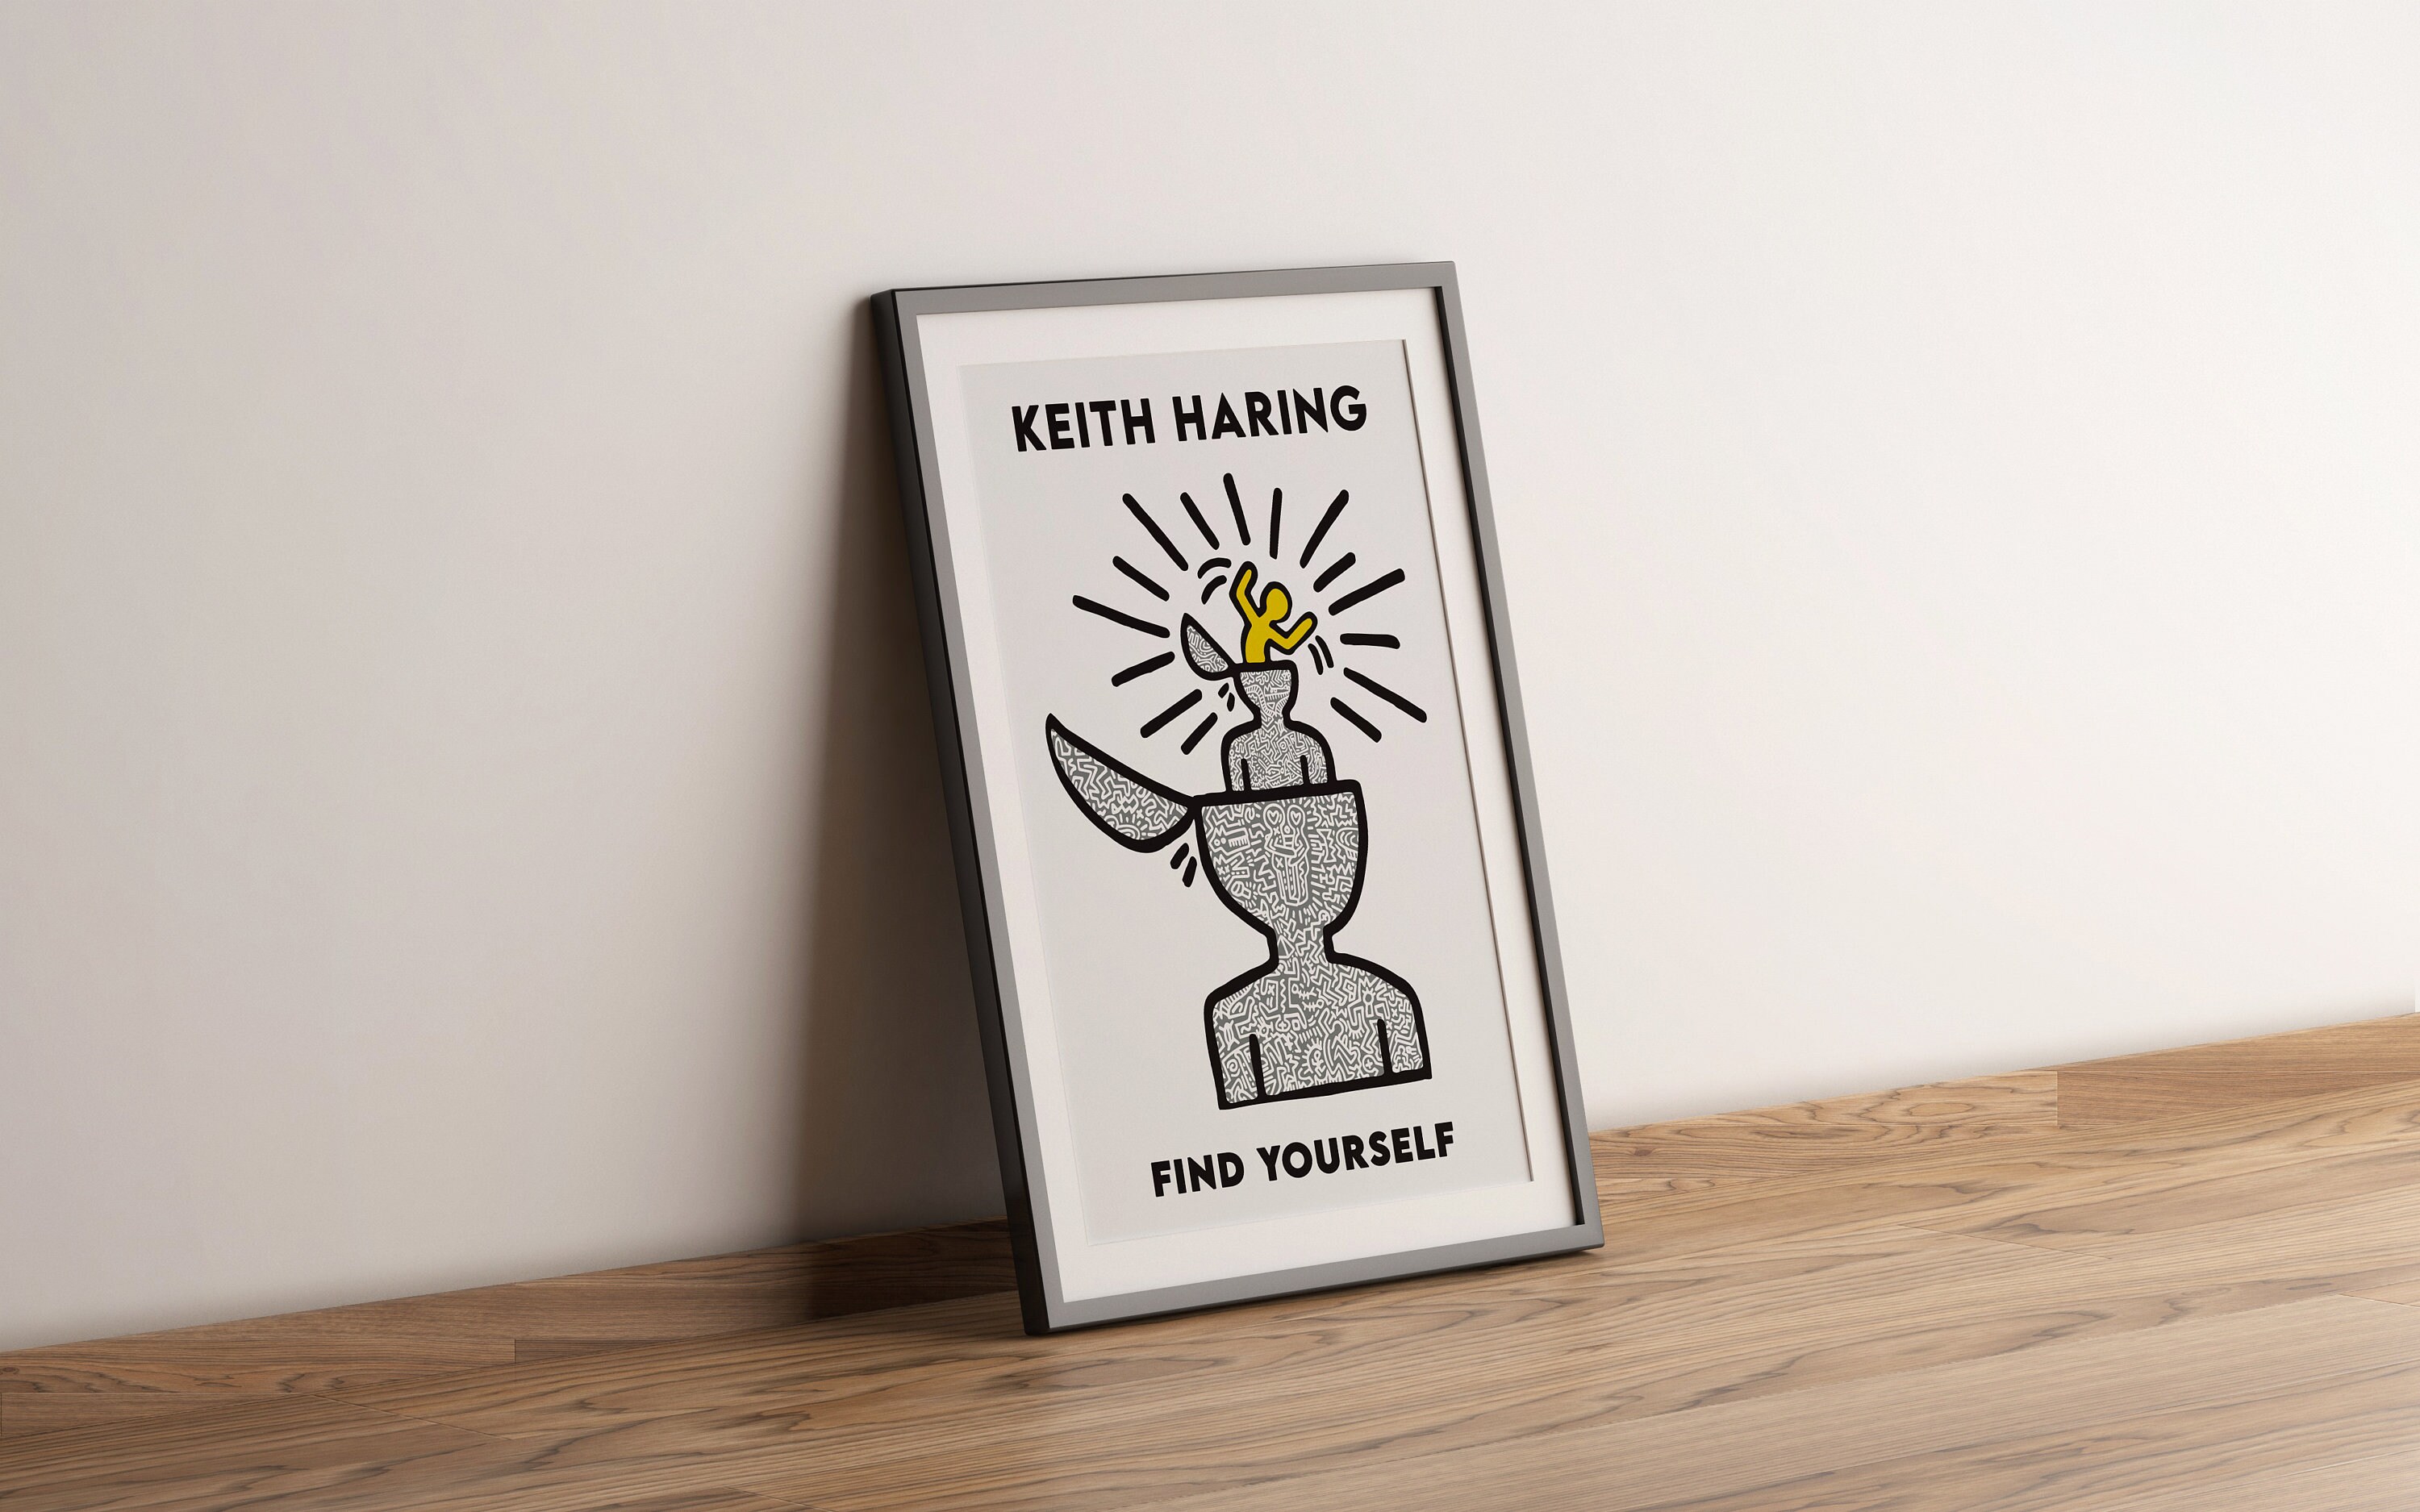 Keith Haring Art Print, Keith Haring Find Yourself Poster sold by